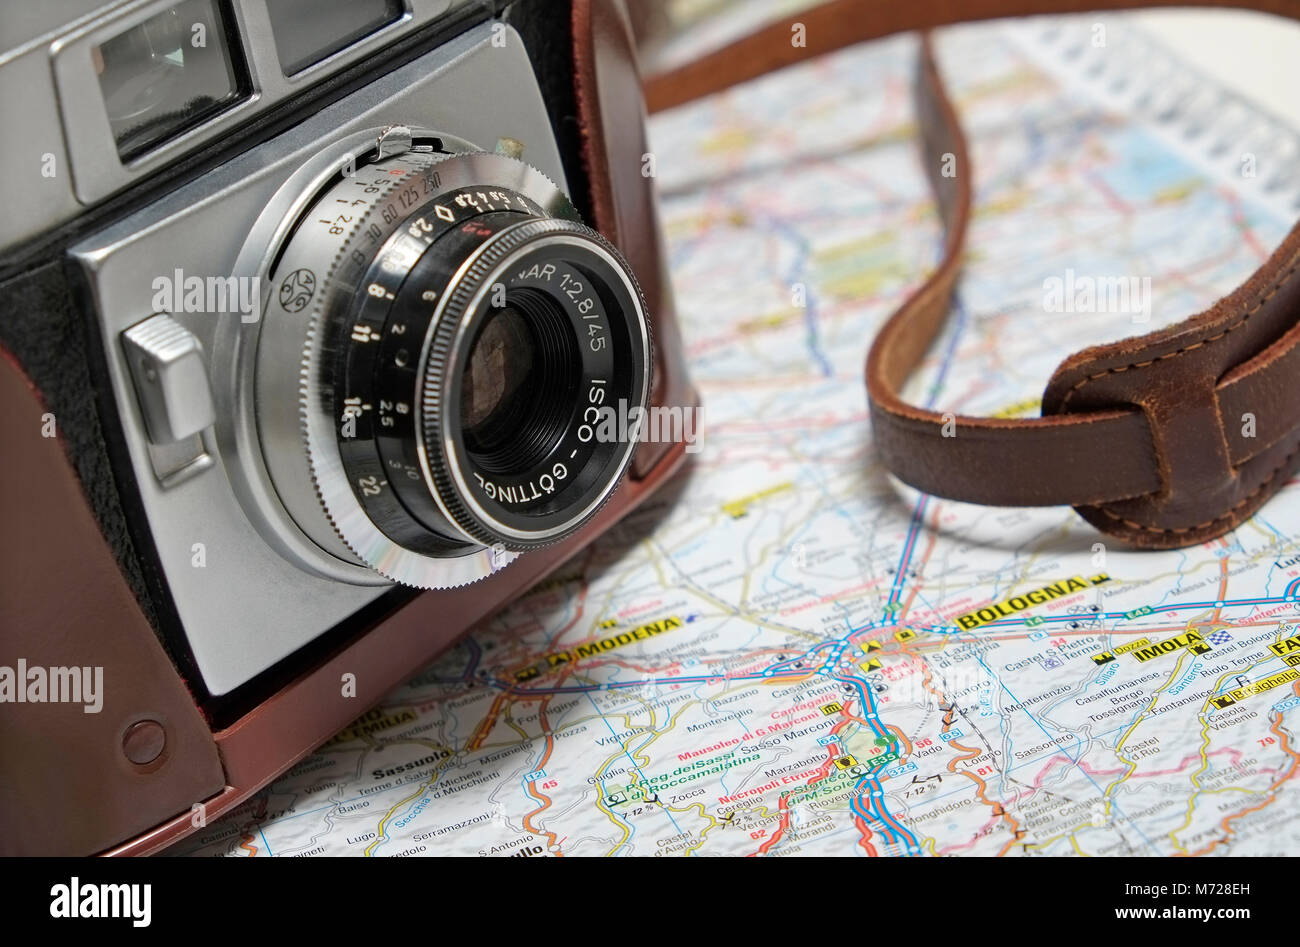 old retro style 35mm rangefinder camera on map of italy Stock Photo